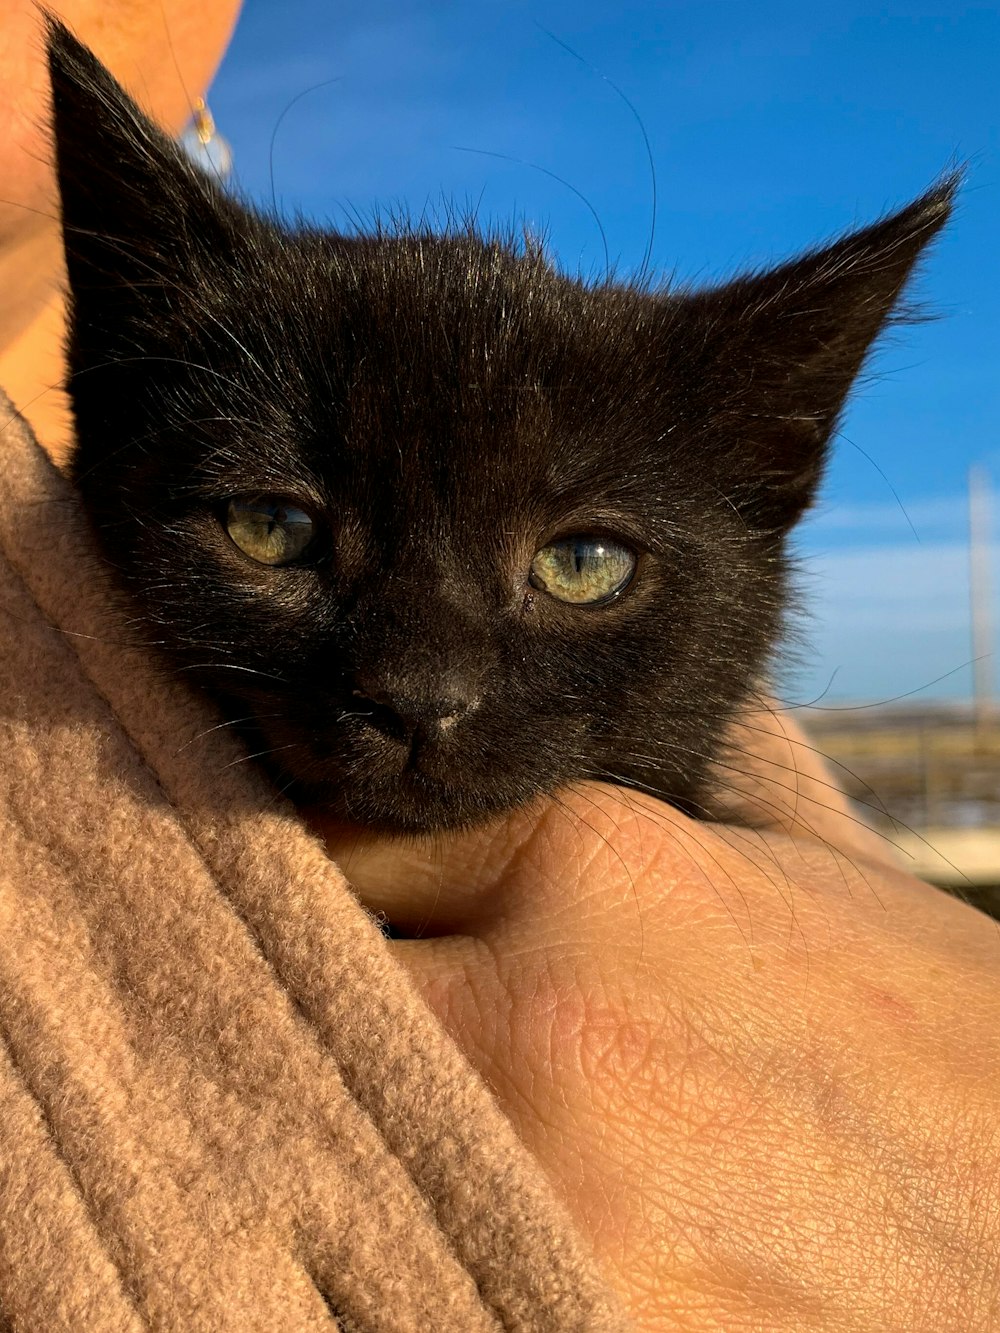 a small black kitten is being held by someone